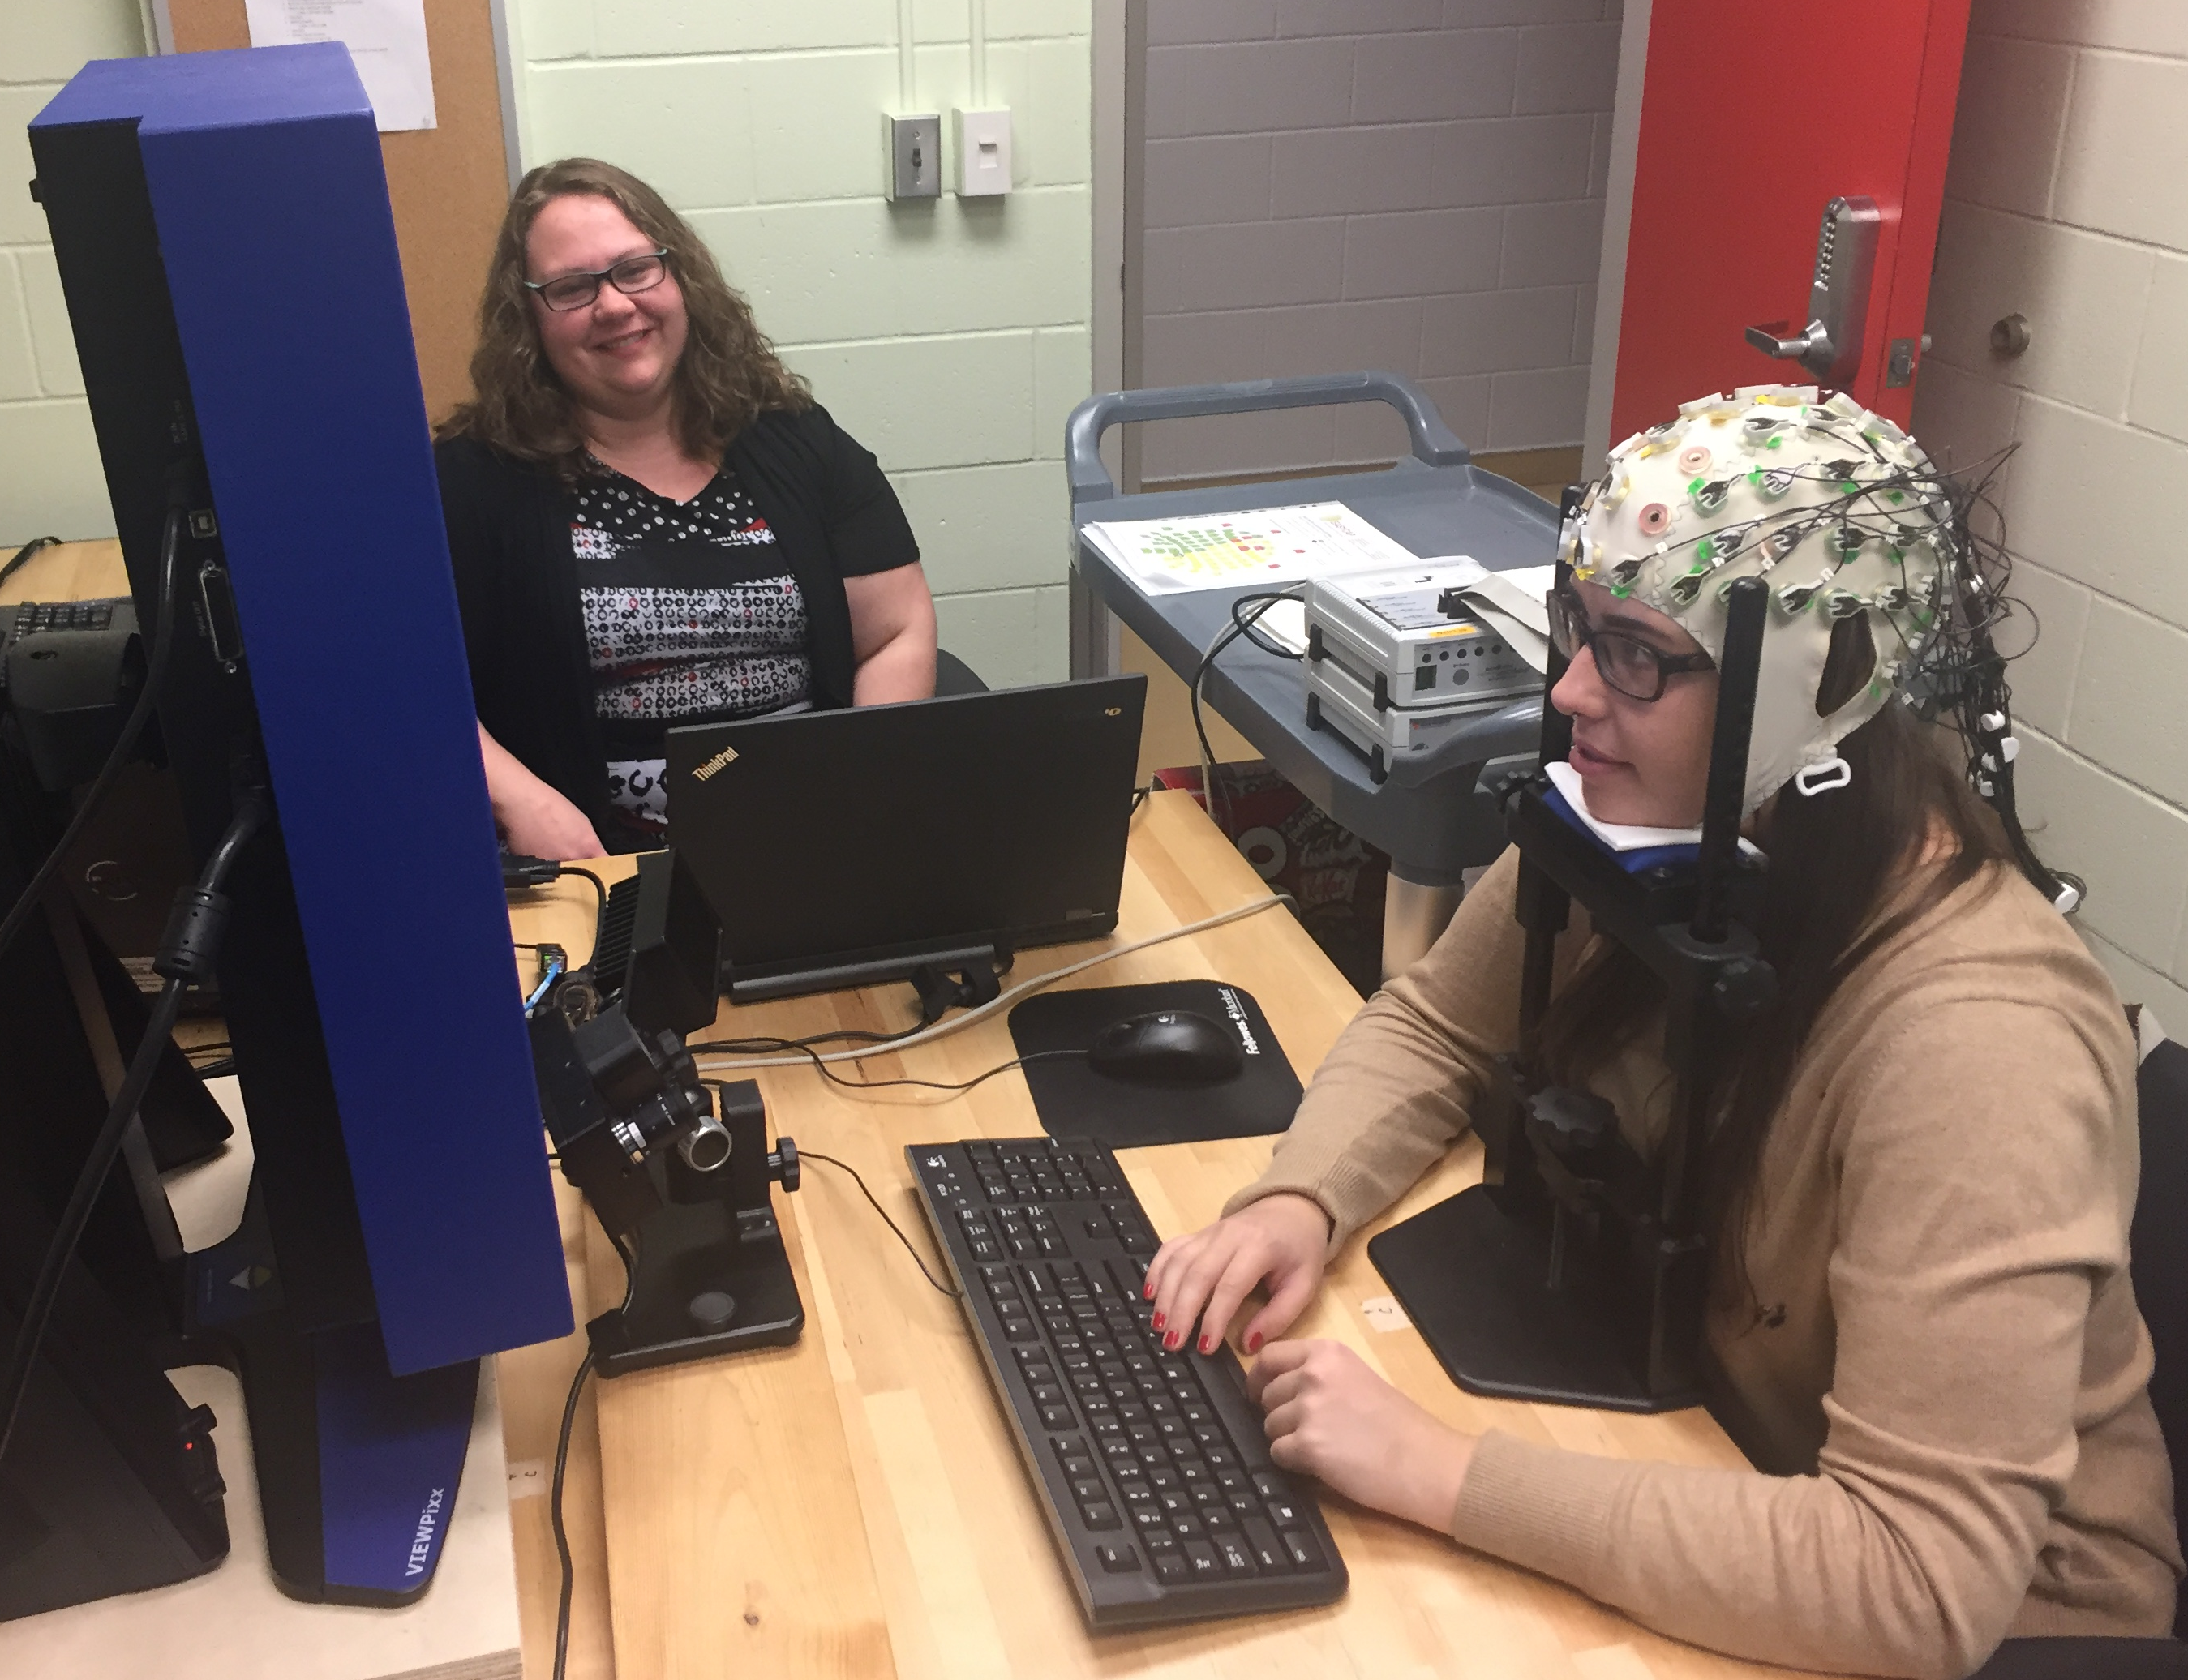 Graduate student Karisa Parkington and research assistant Karla Murtescu demonstrate an EEG and eye-tracking experiment